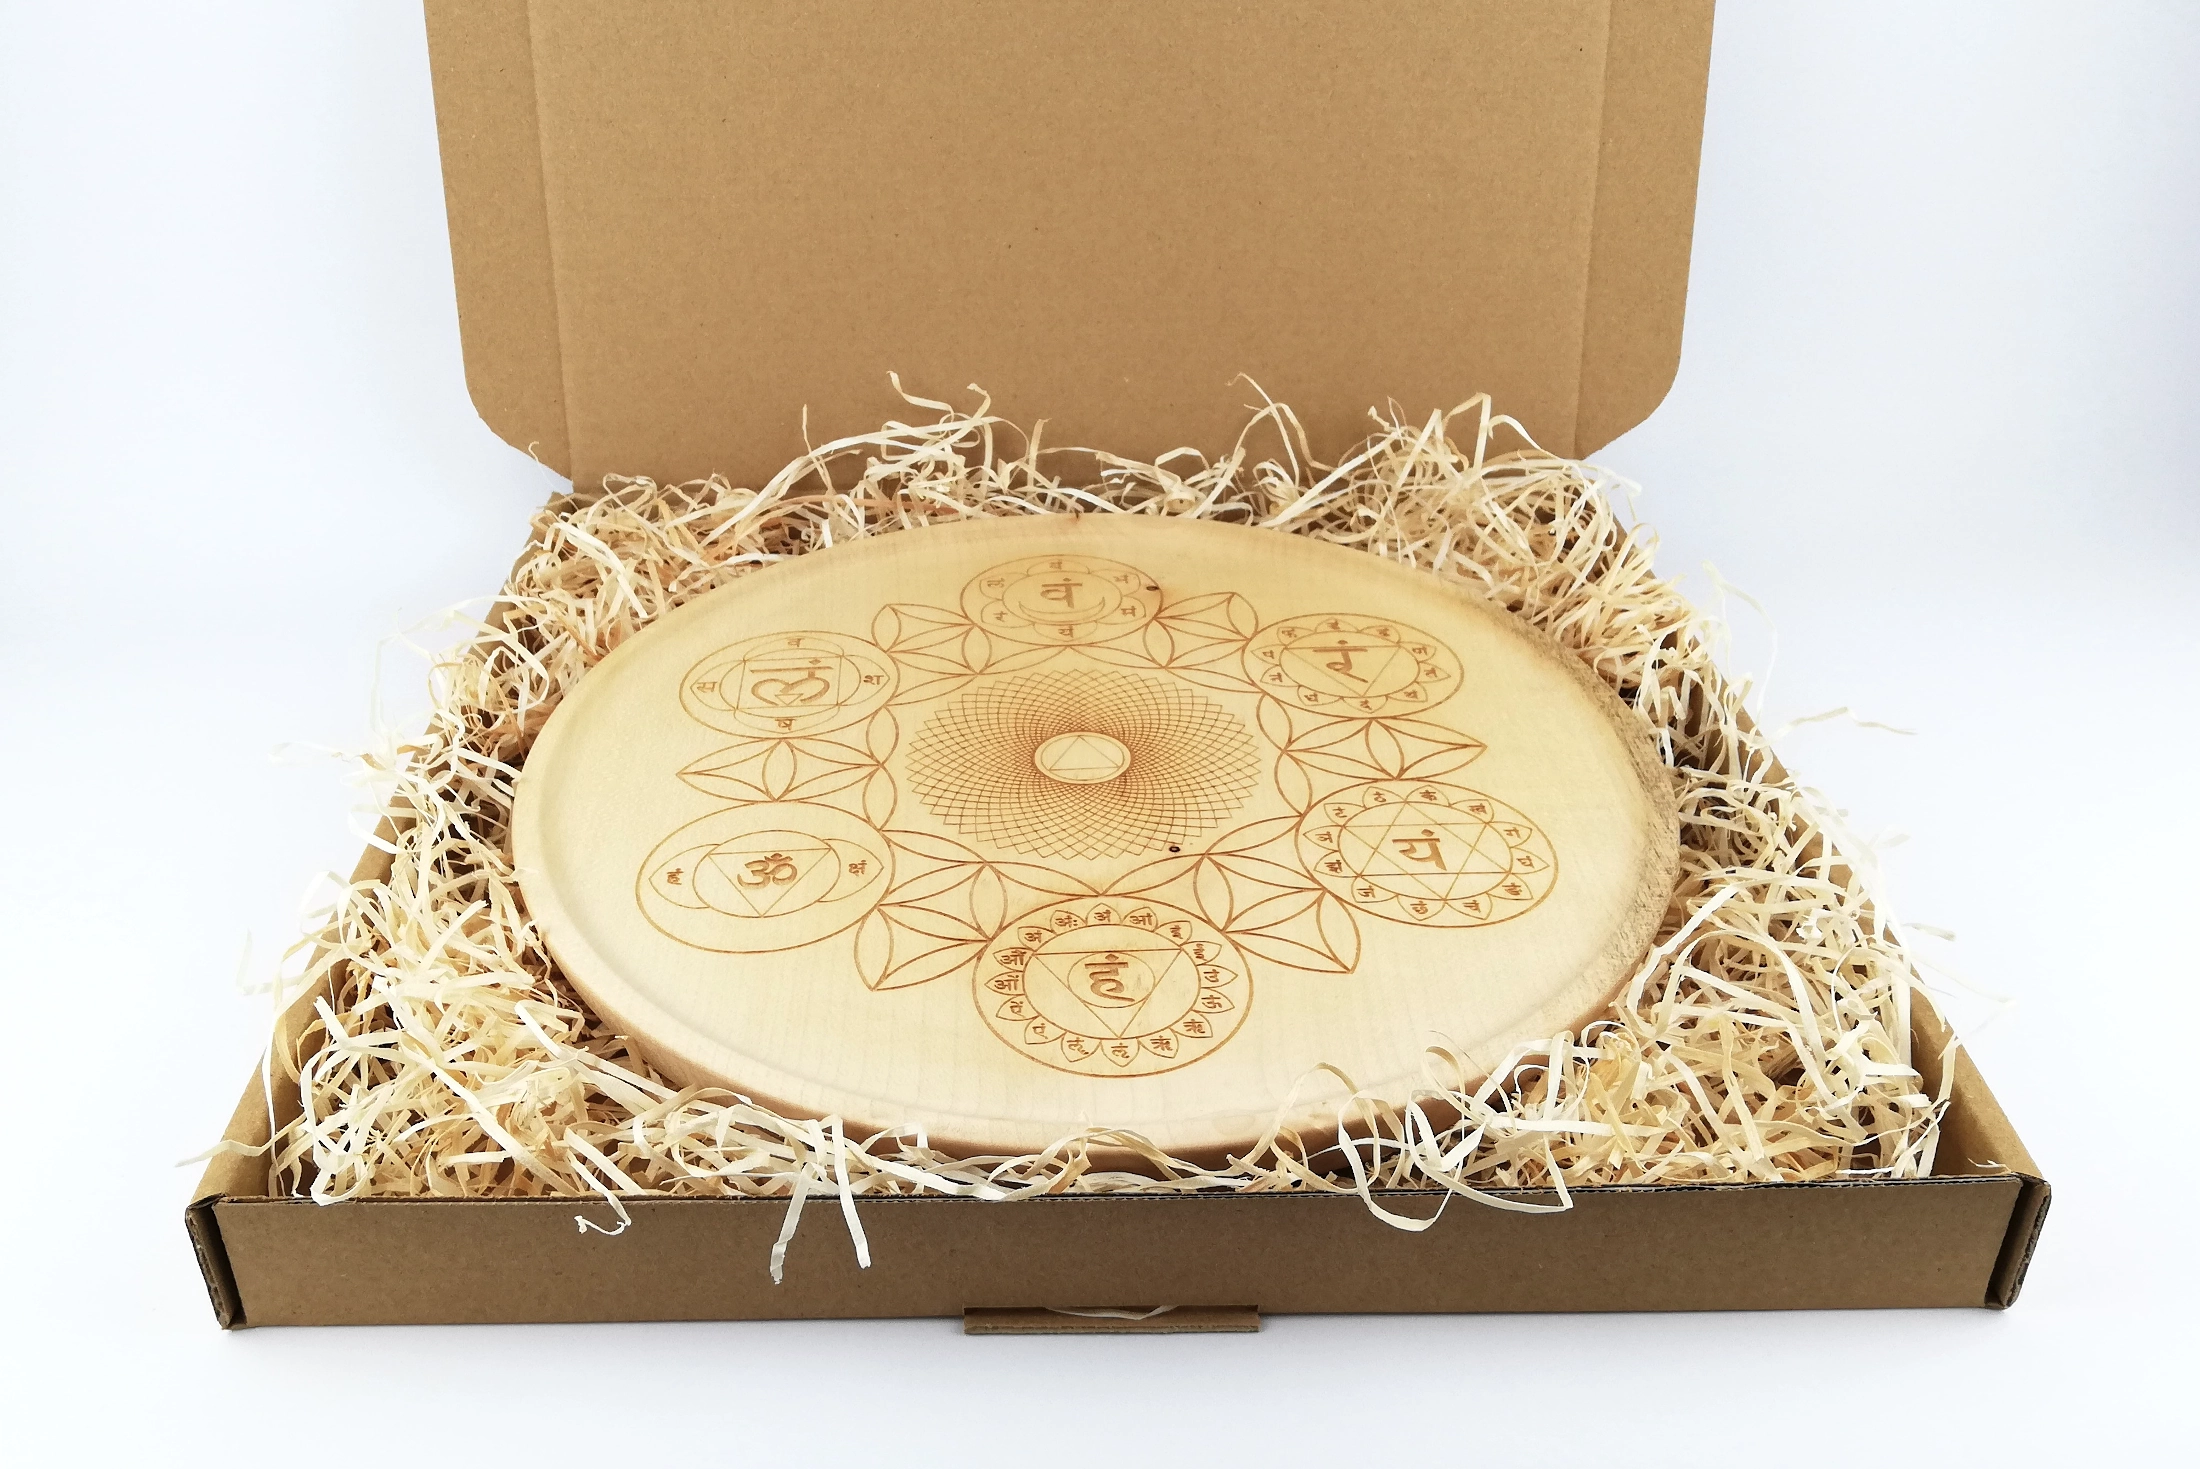 All chakras on one big plate (30cm/11.8in in diameter), packed in a box.